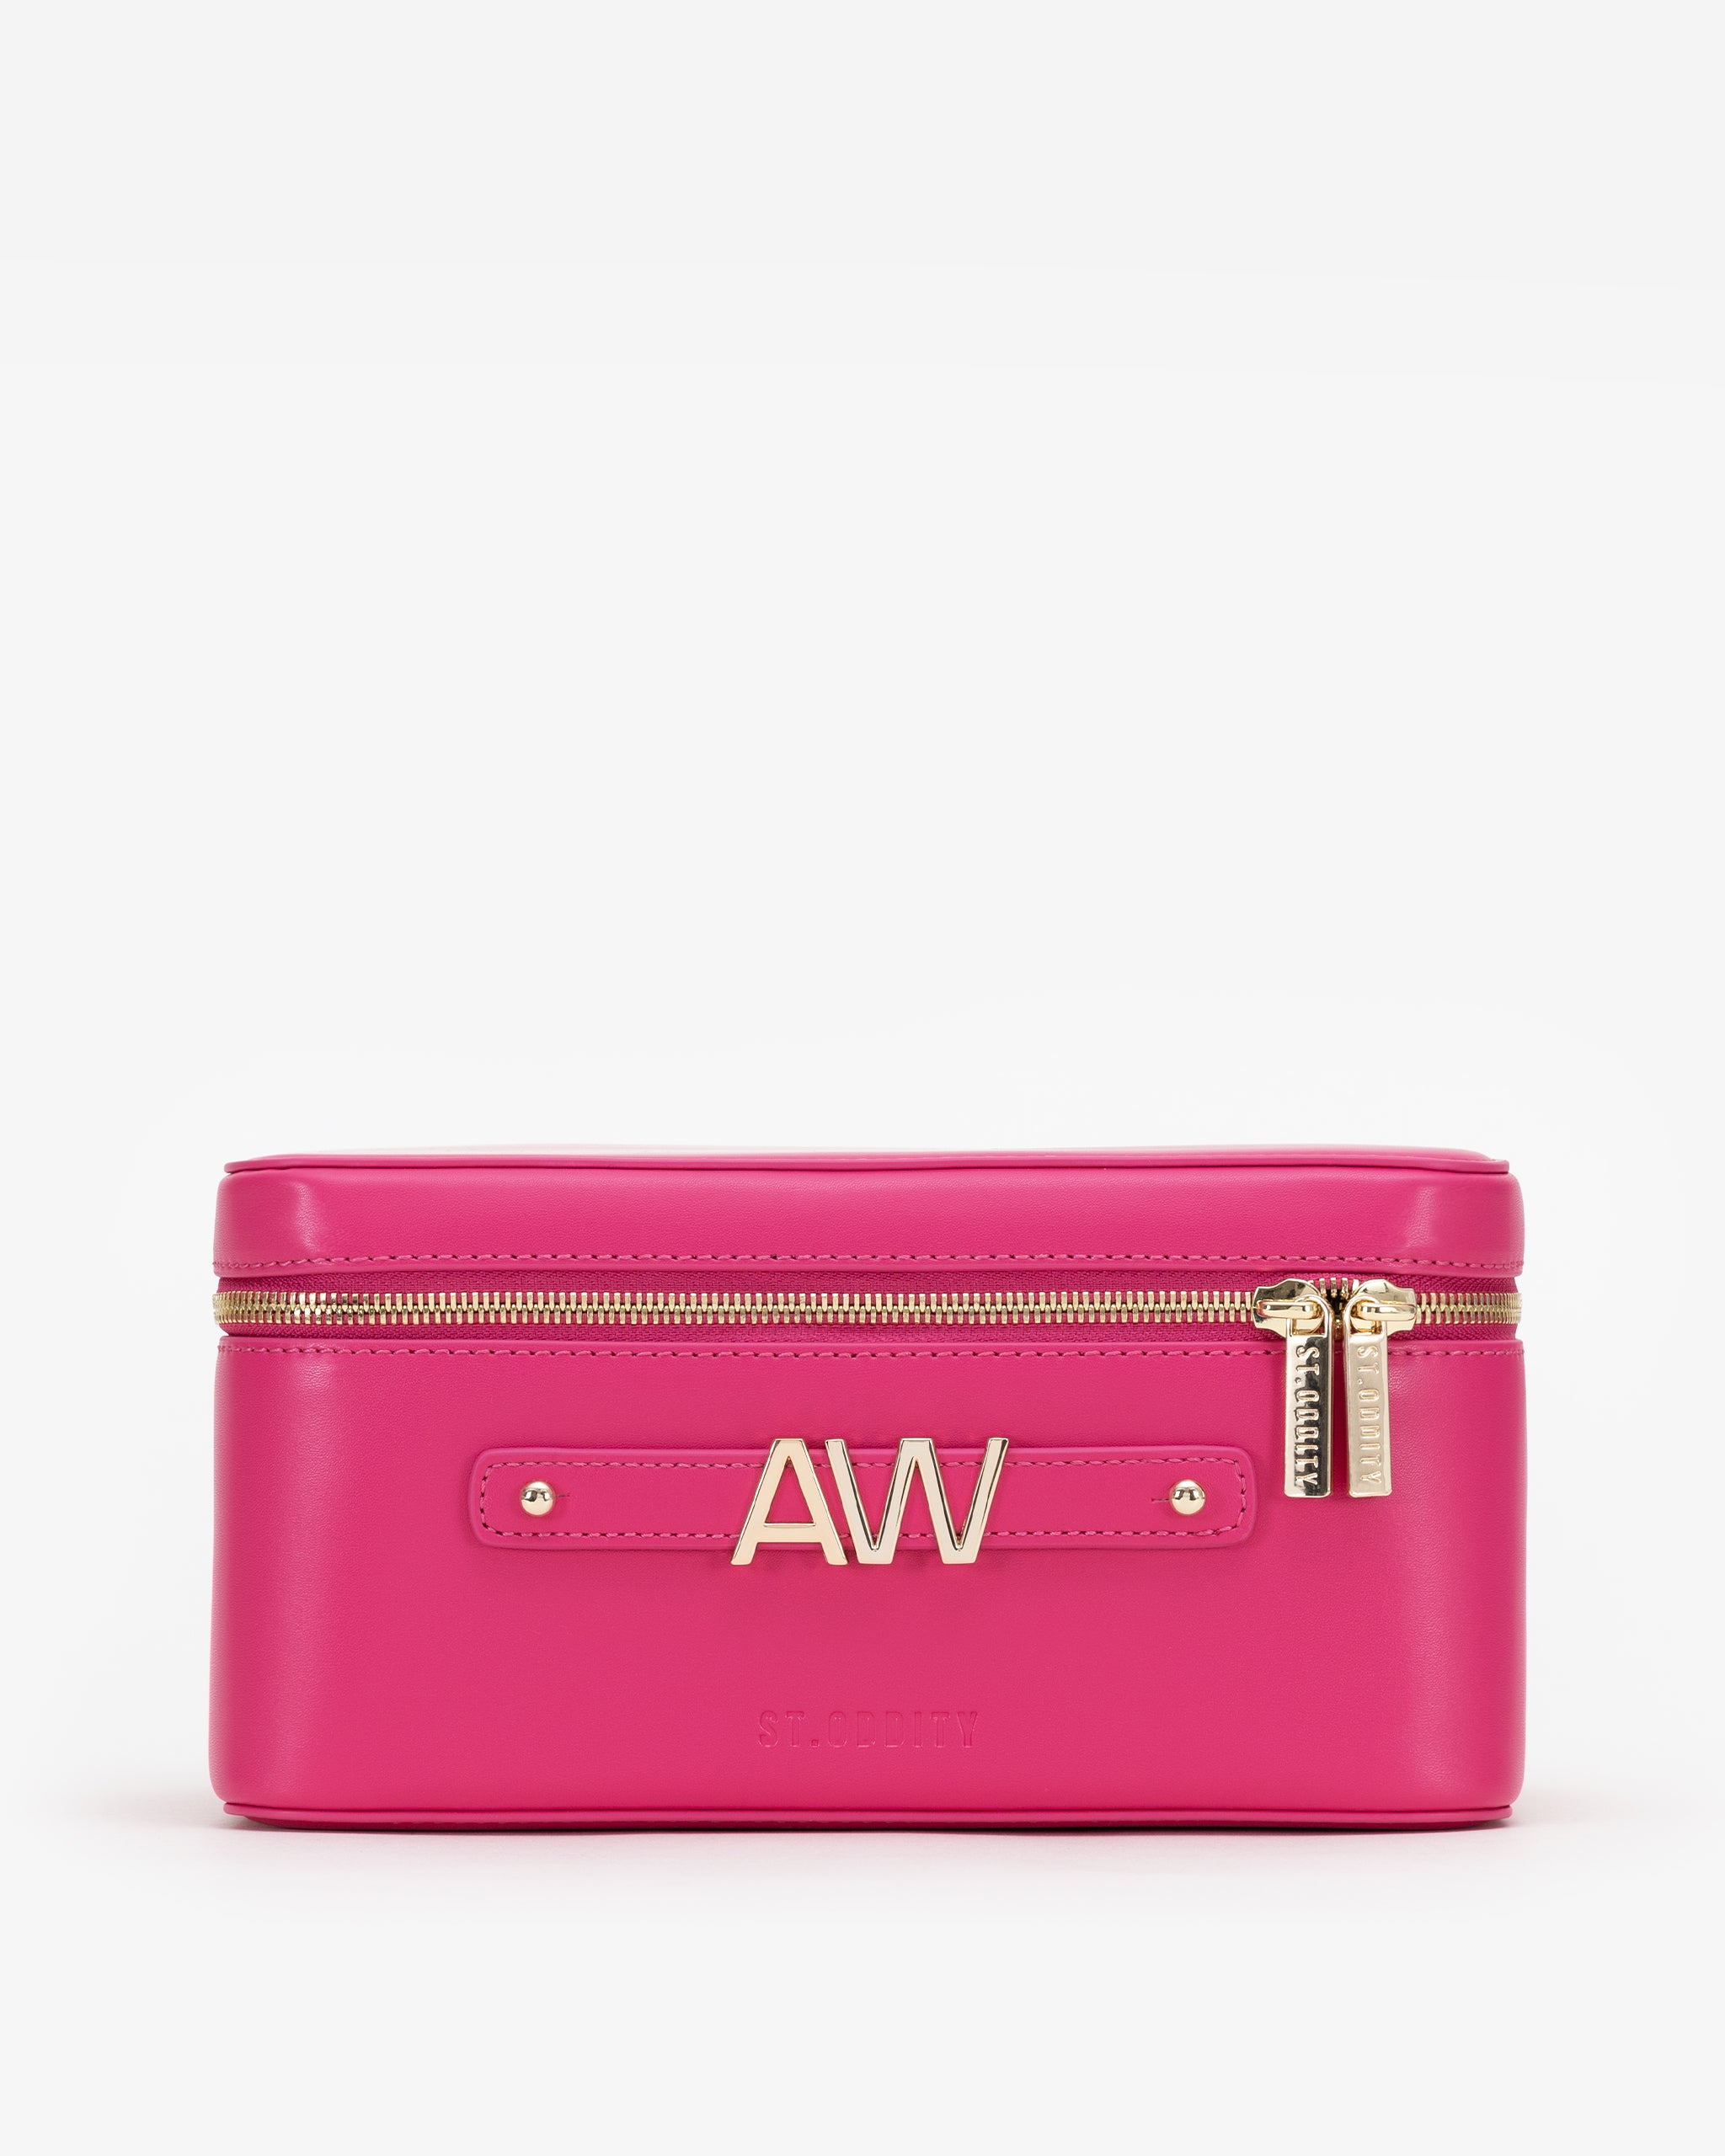 Pre-order (Mid-May): Vanity Case in Hot Pink with Personalised Hardware